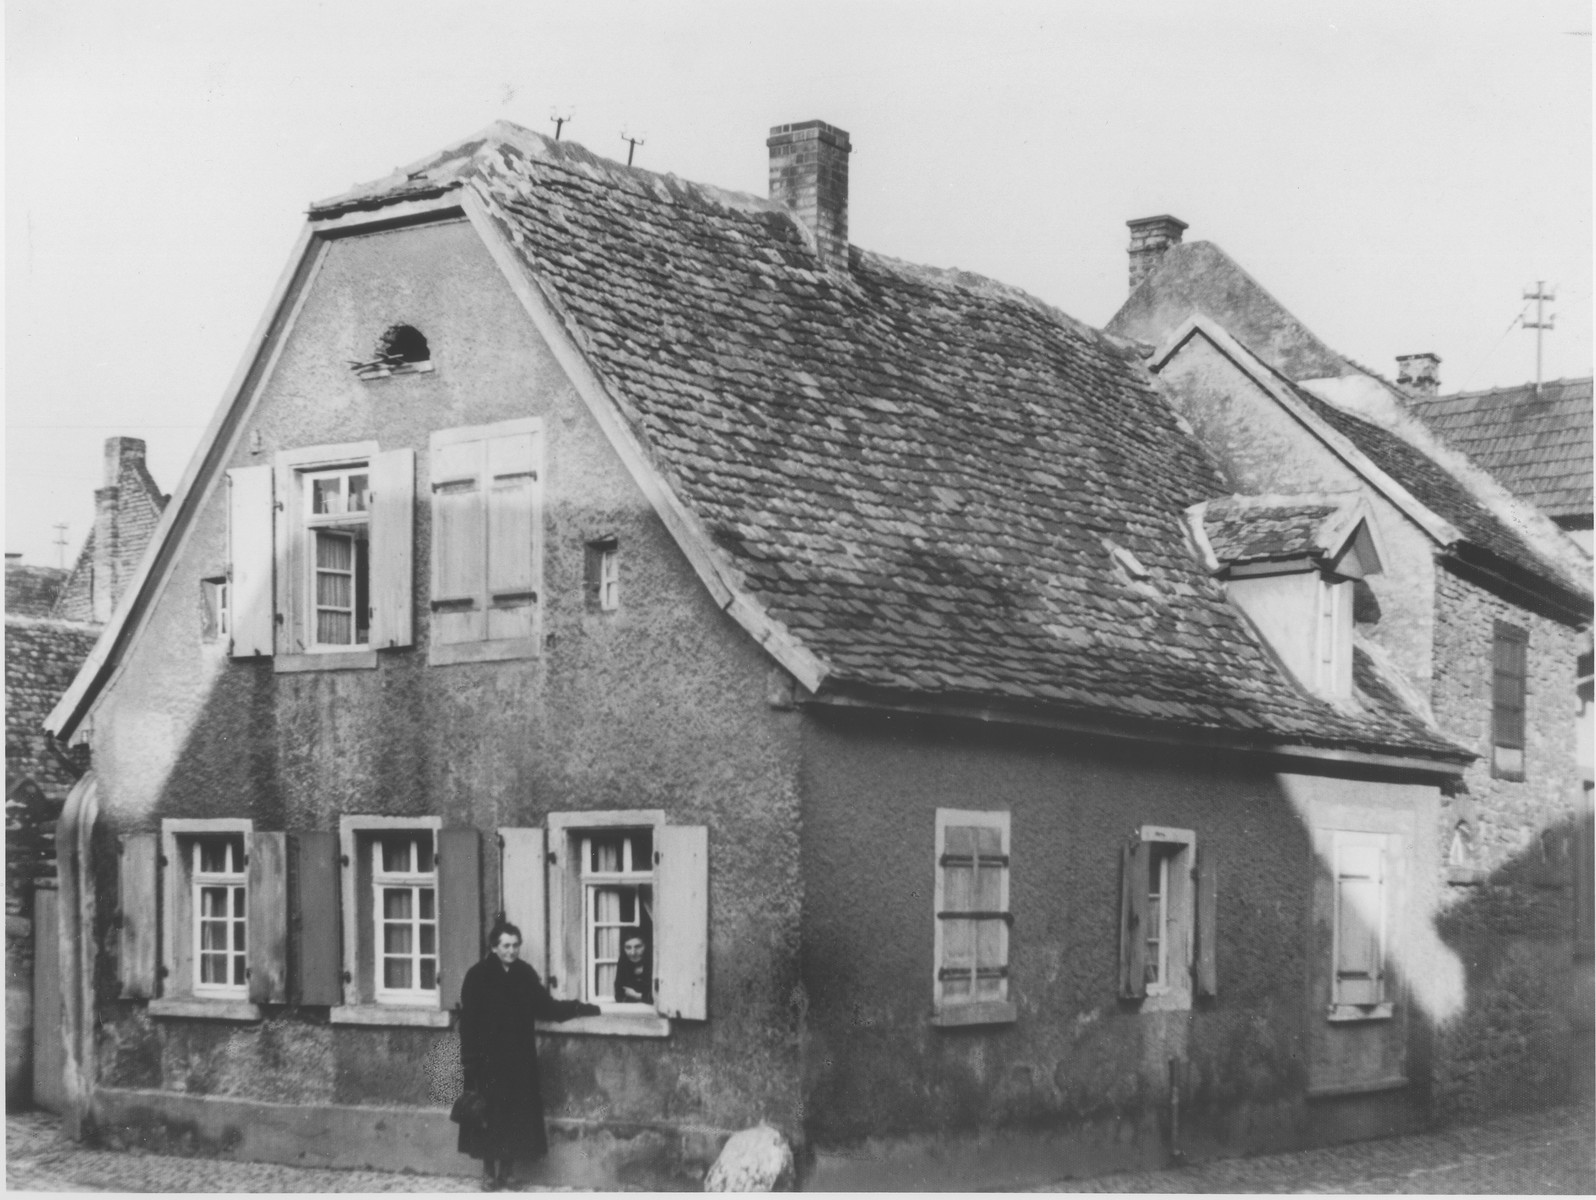 View of the Hellman family home in Guntersblum, Germany.